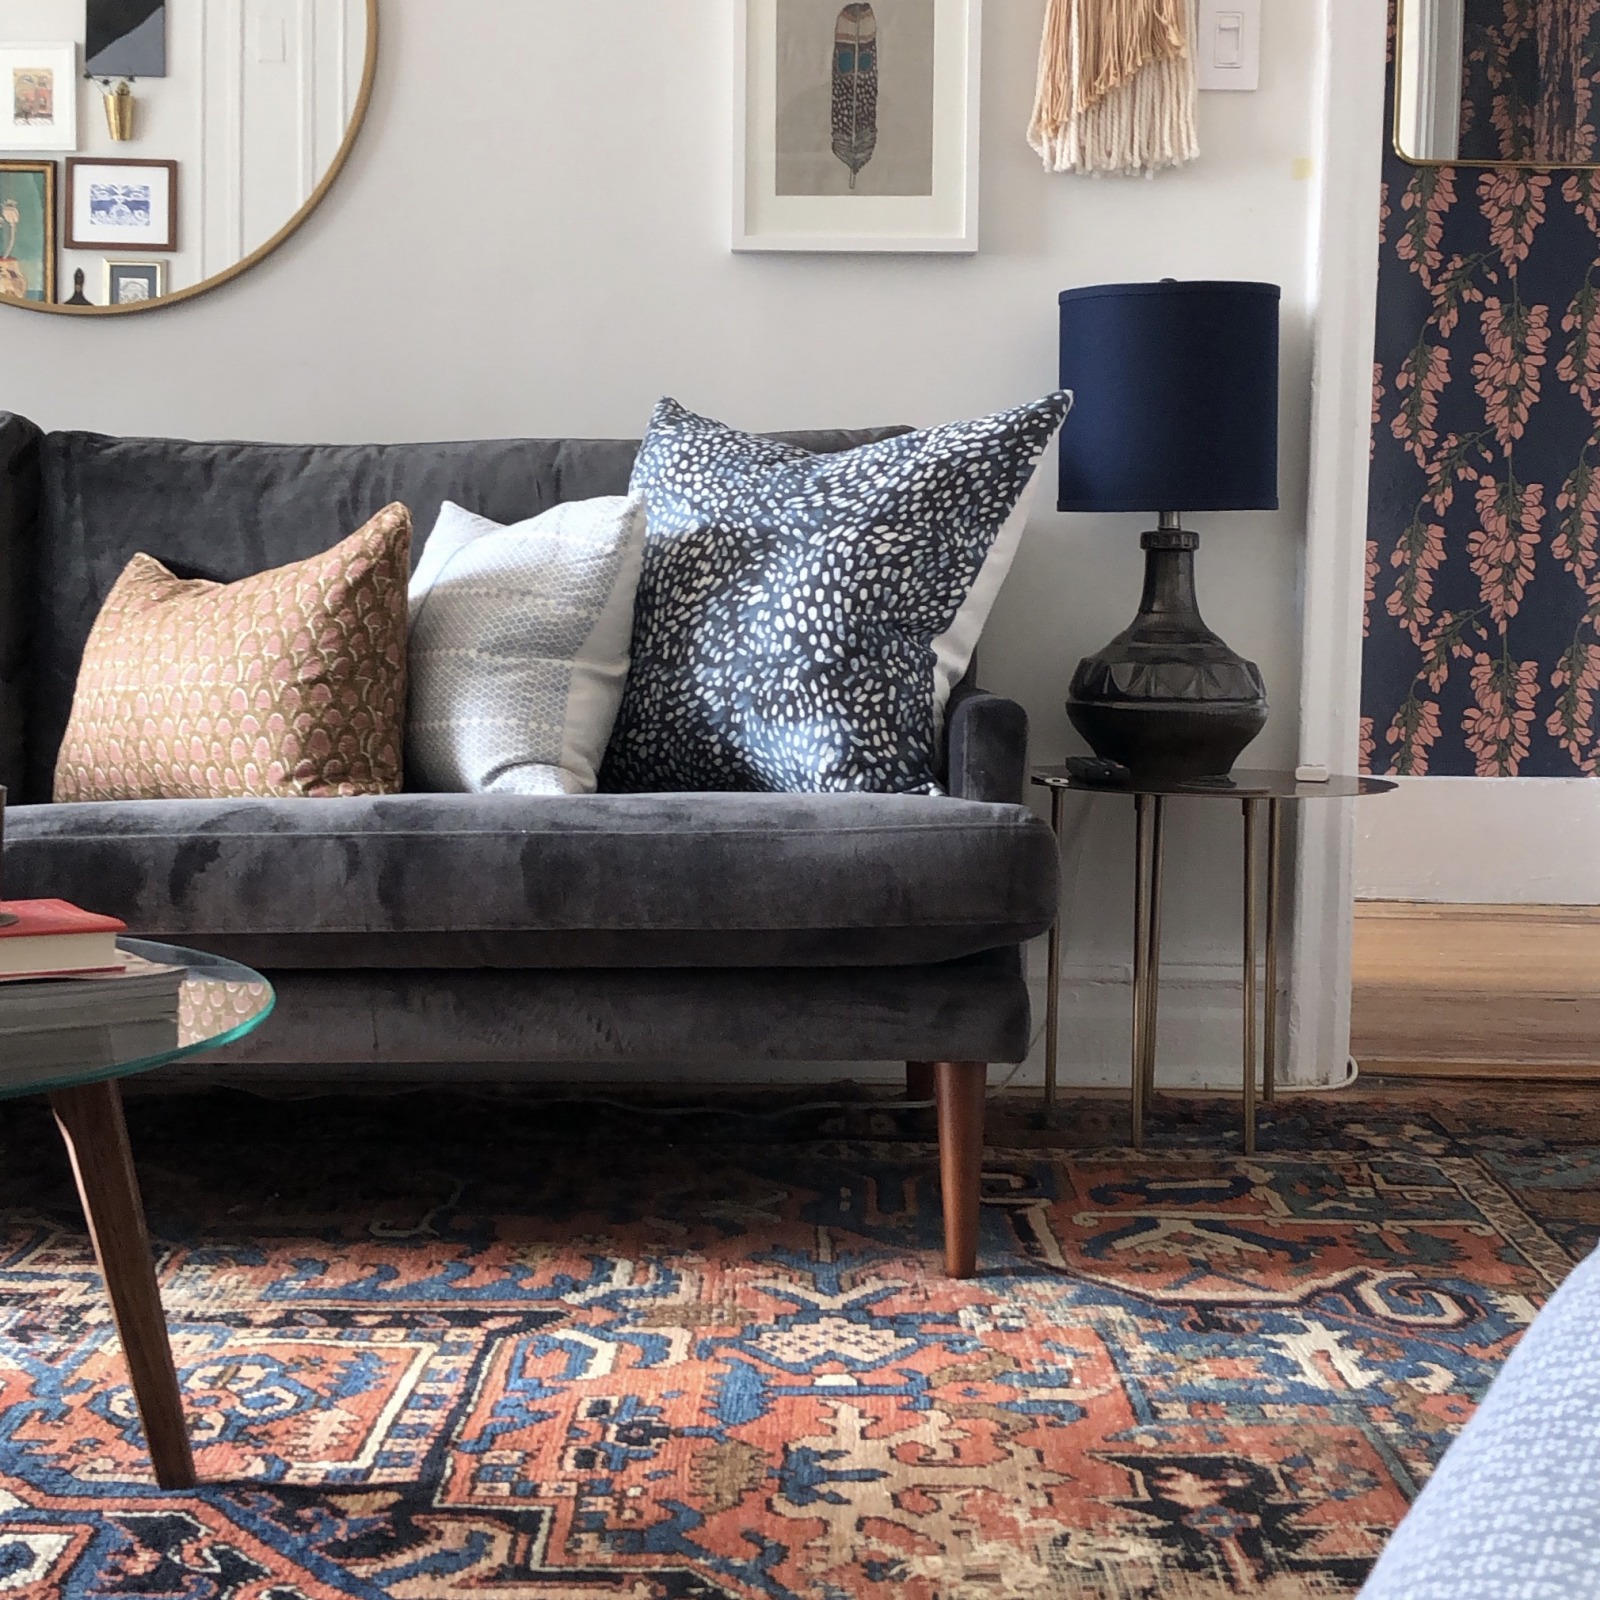 How To Choose The Right Rug For Your, How To Choose Living Room Area Rug